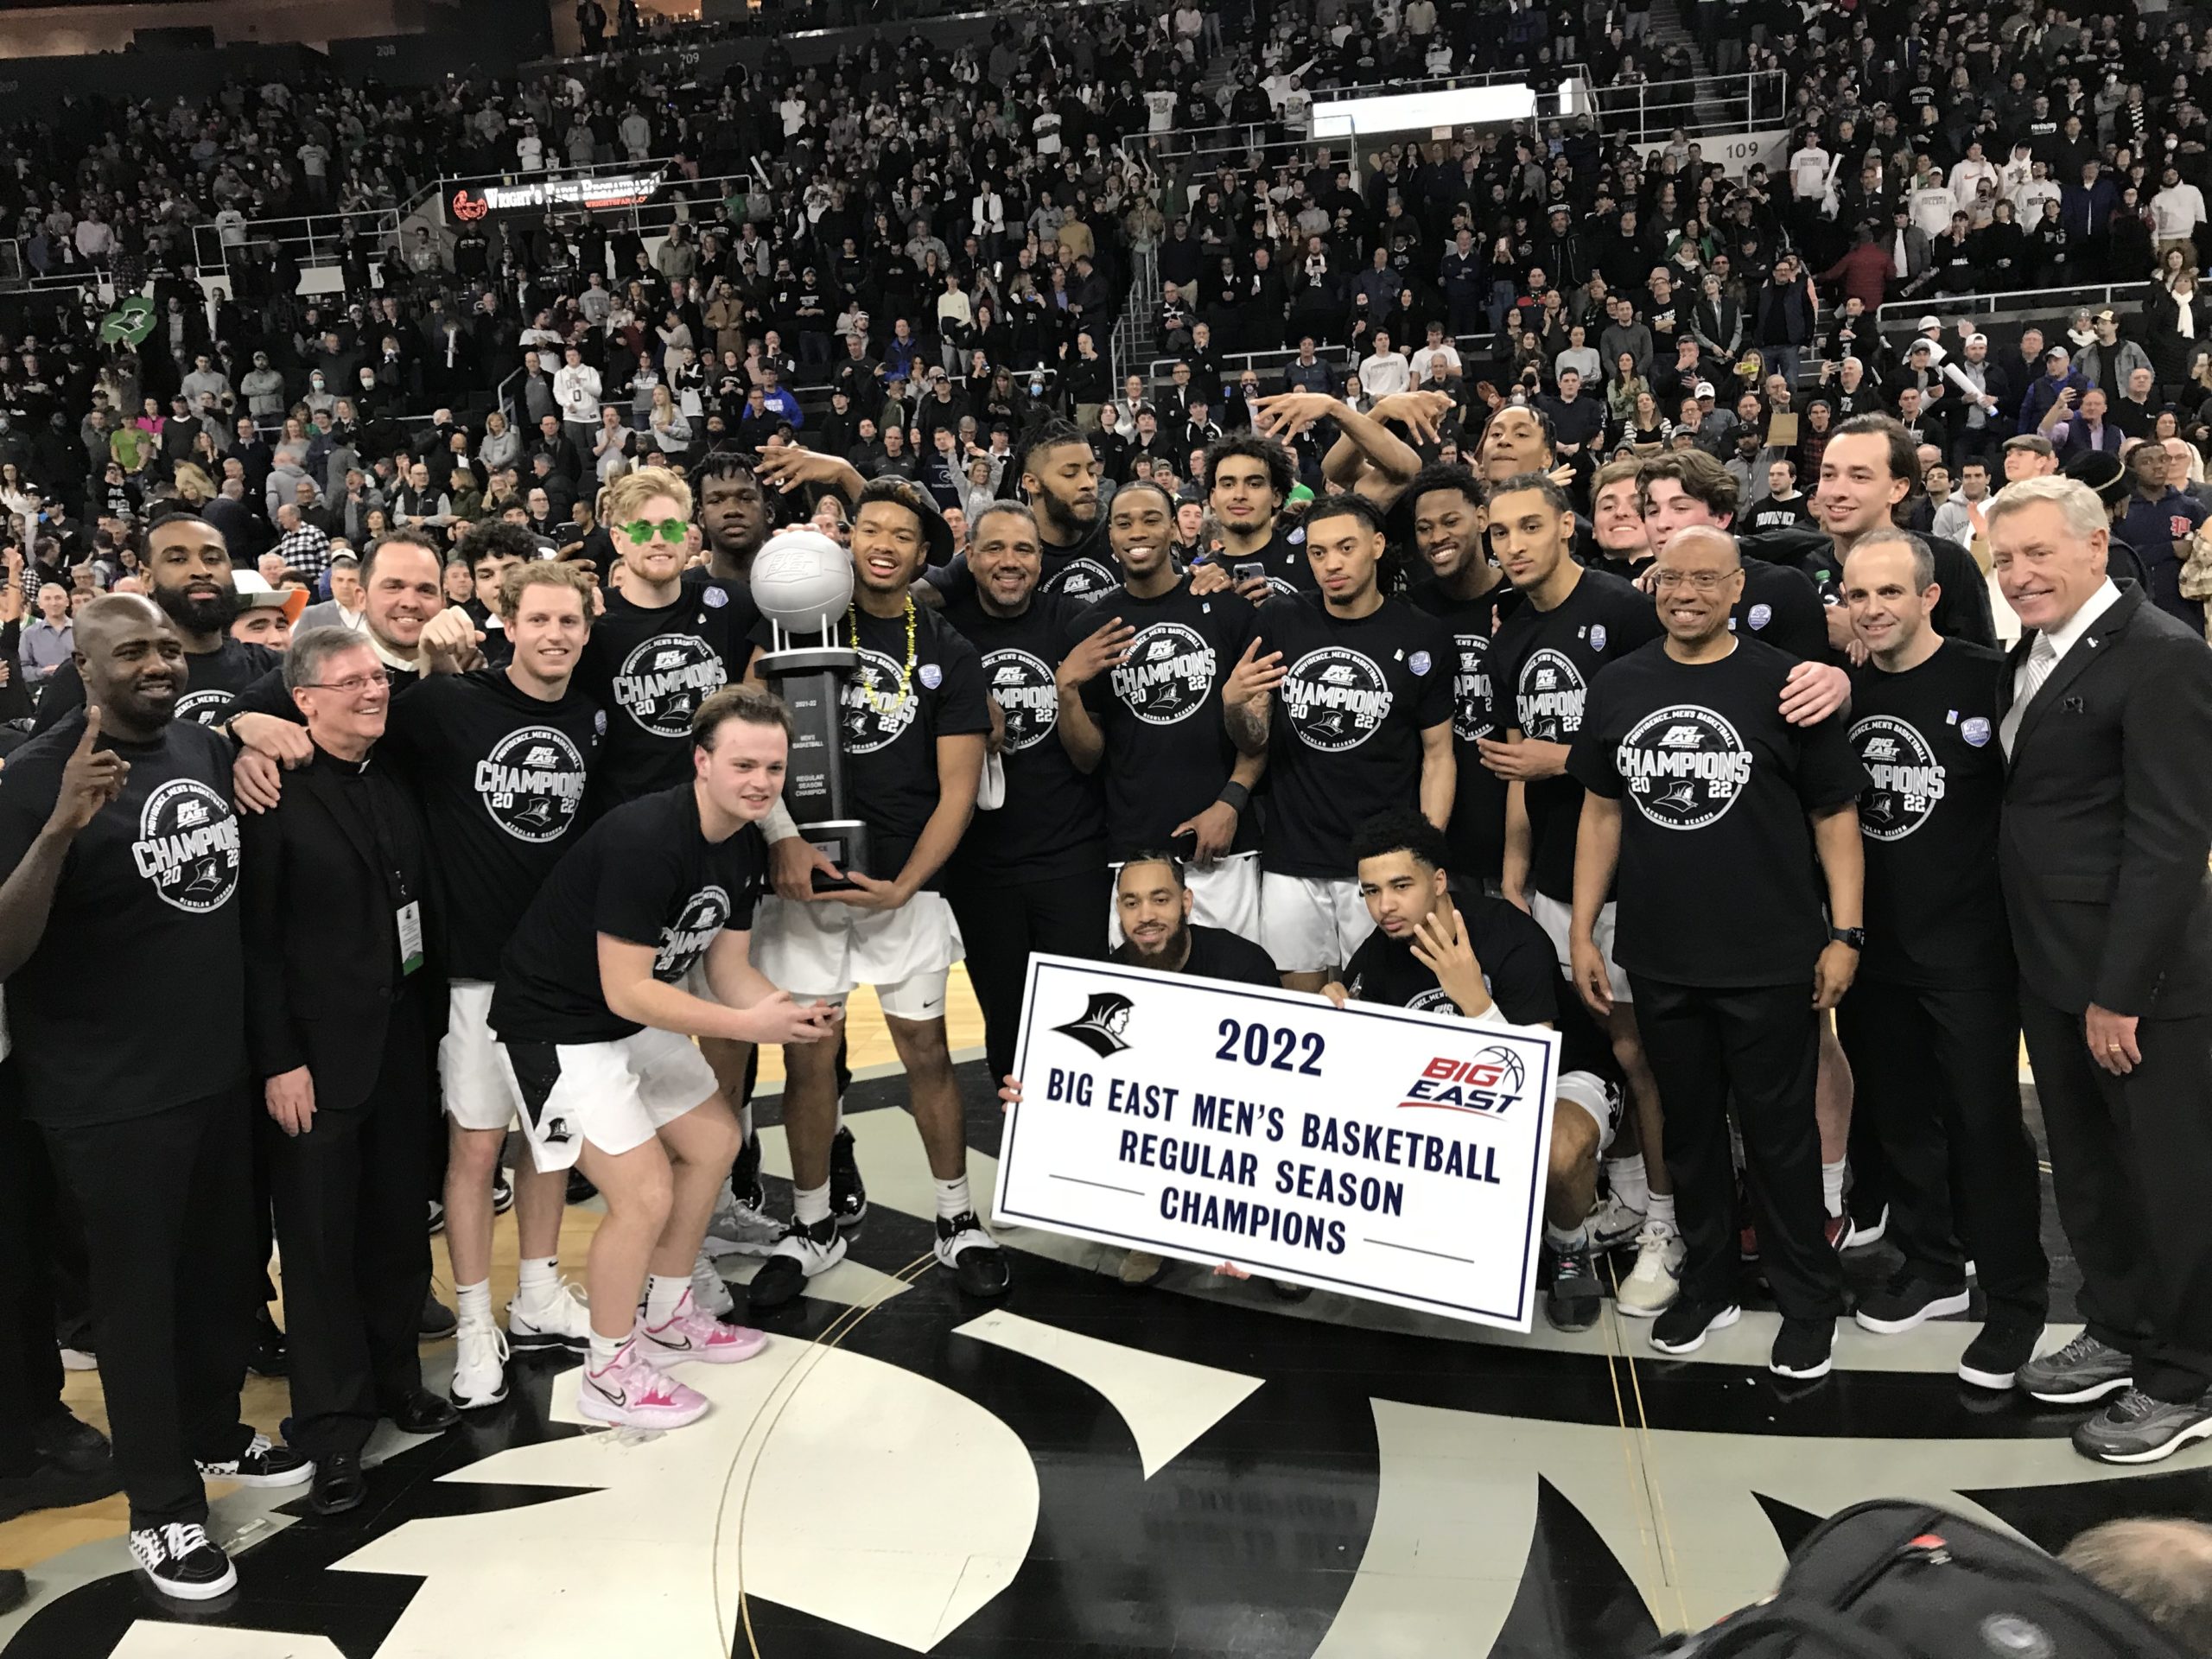 Long Time Coming: Friars claim a first in this Dream Season